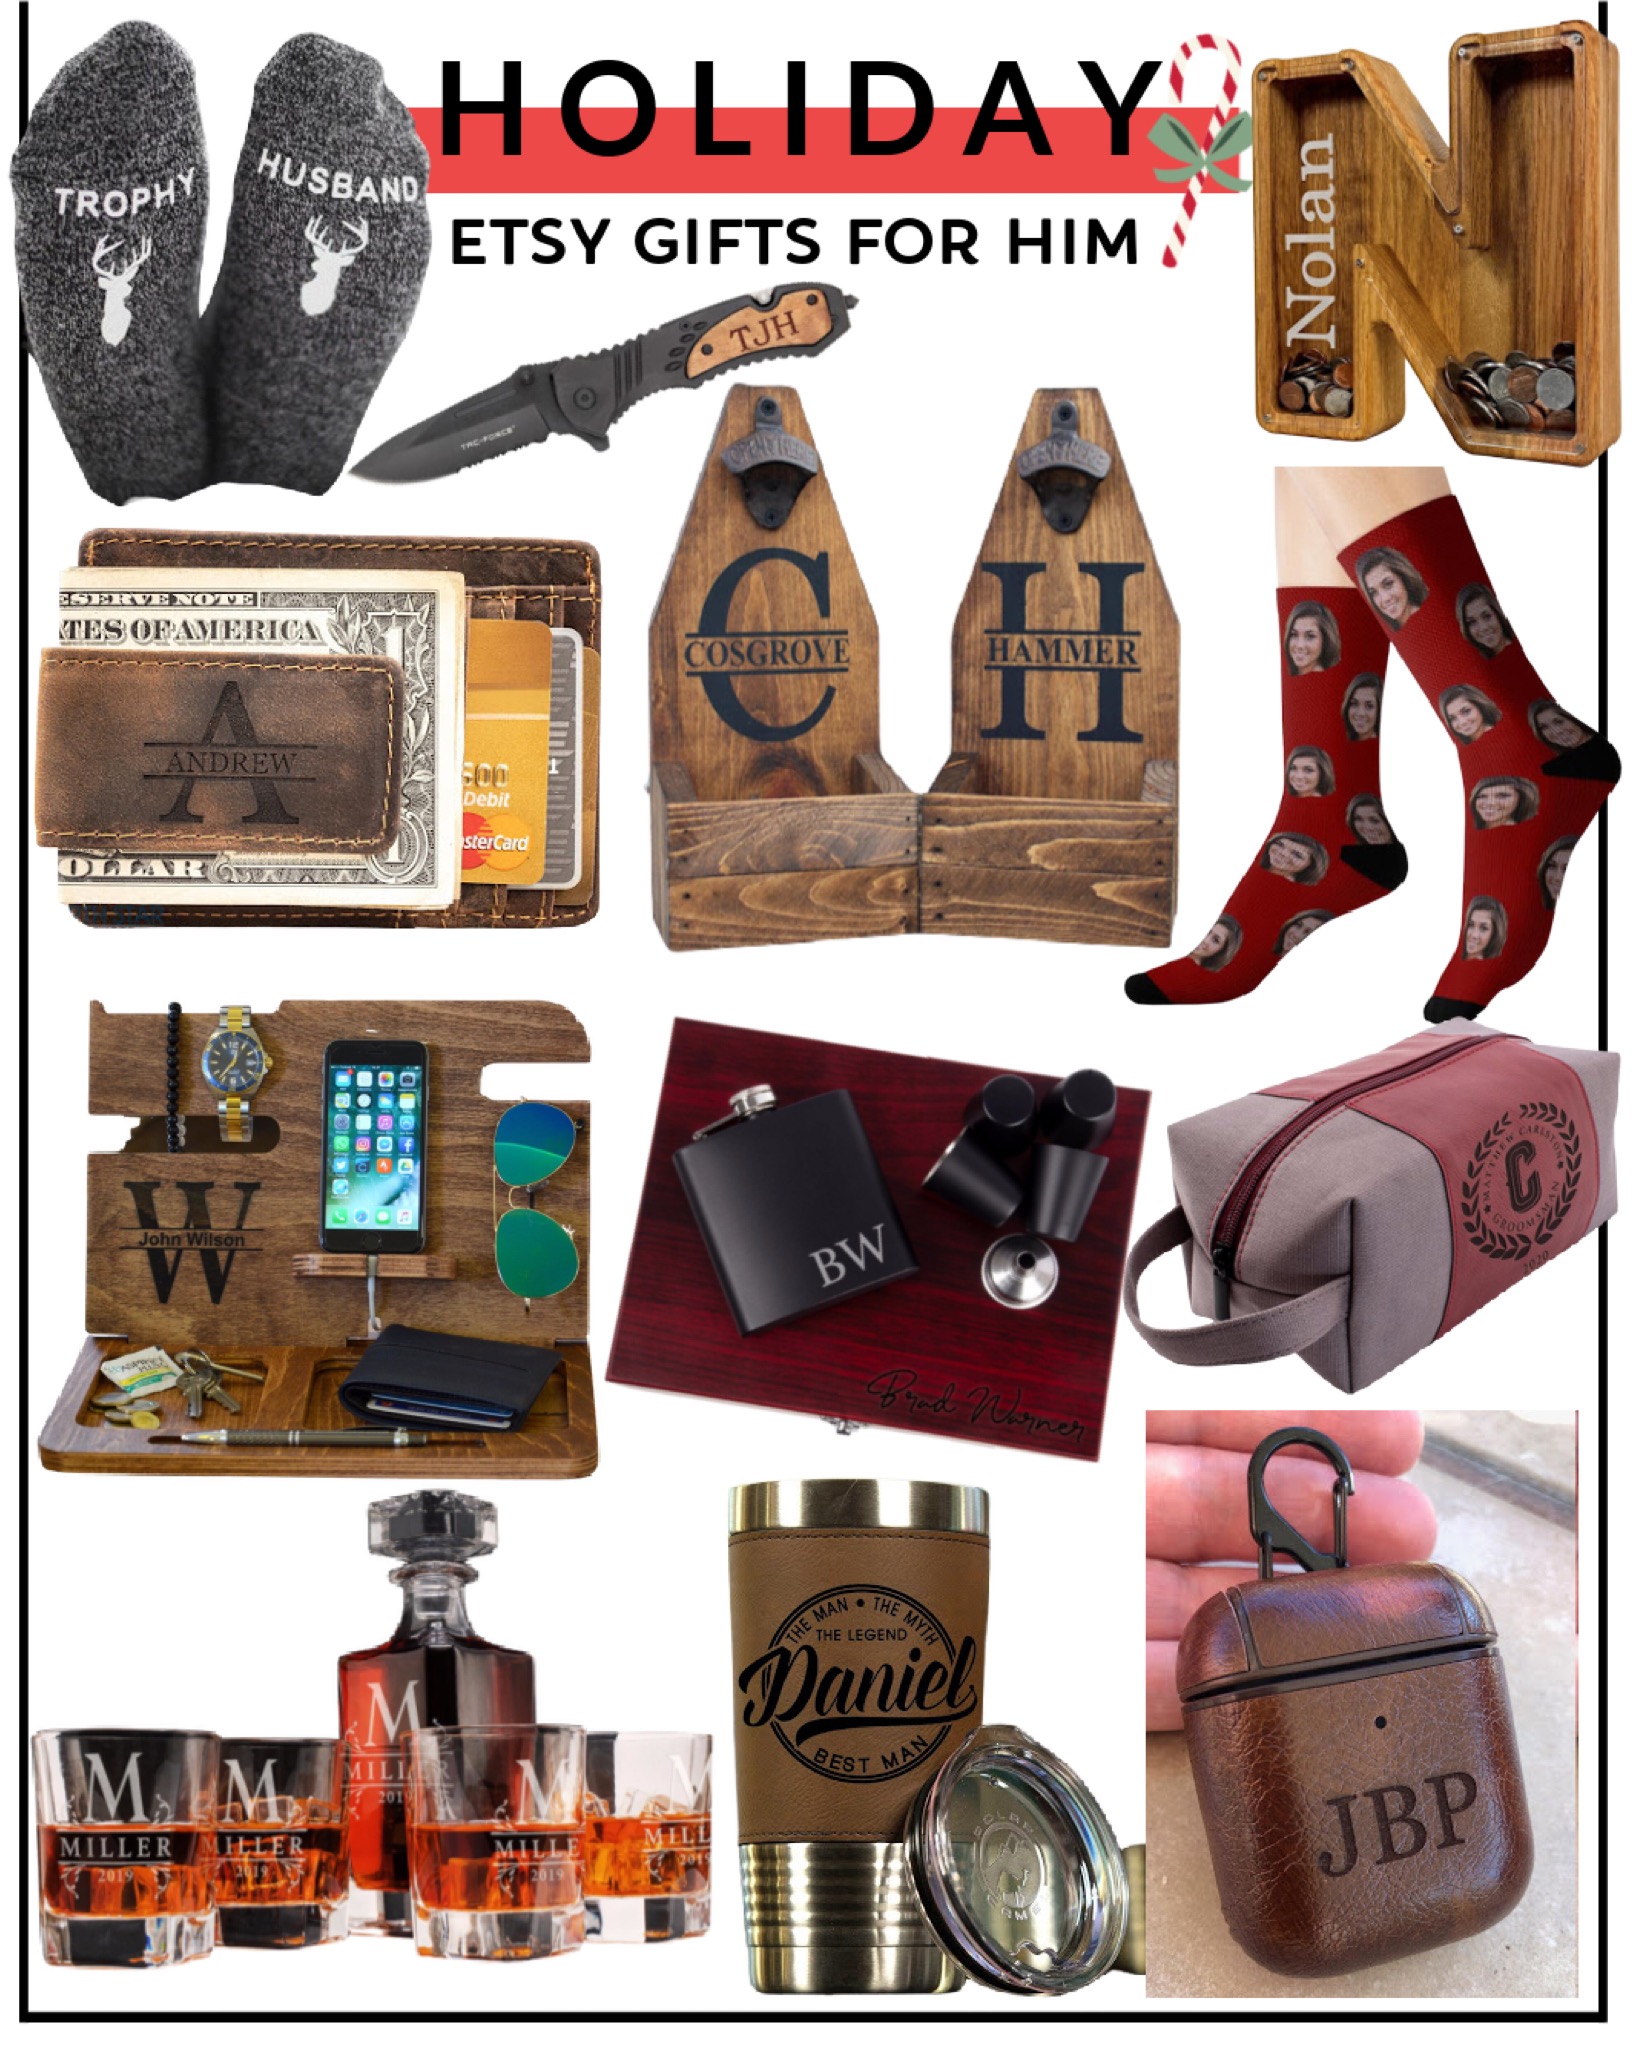 GIFTS FOR MEN - The Sister Studio